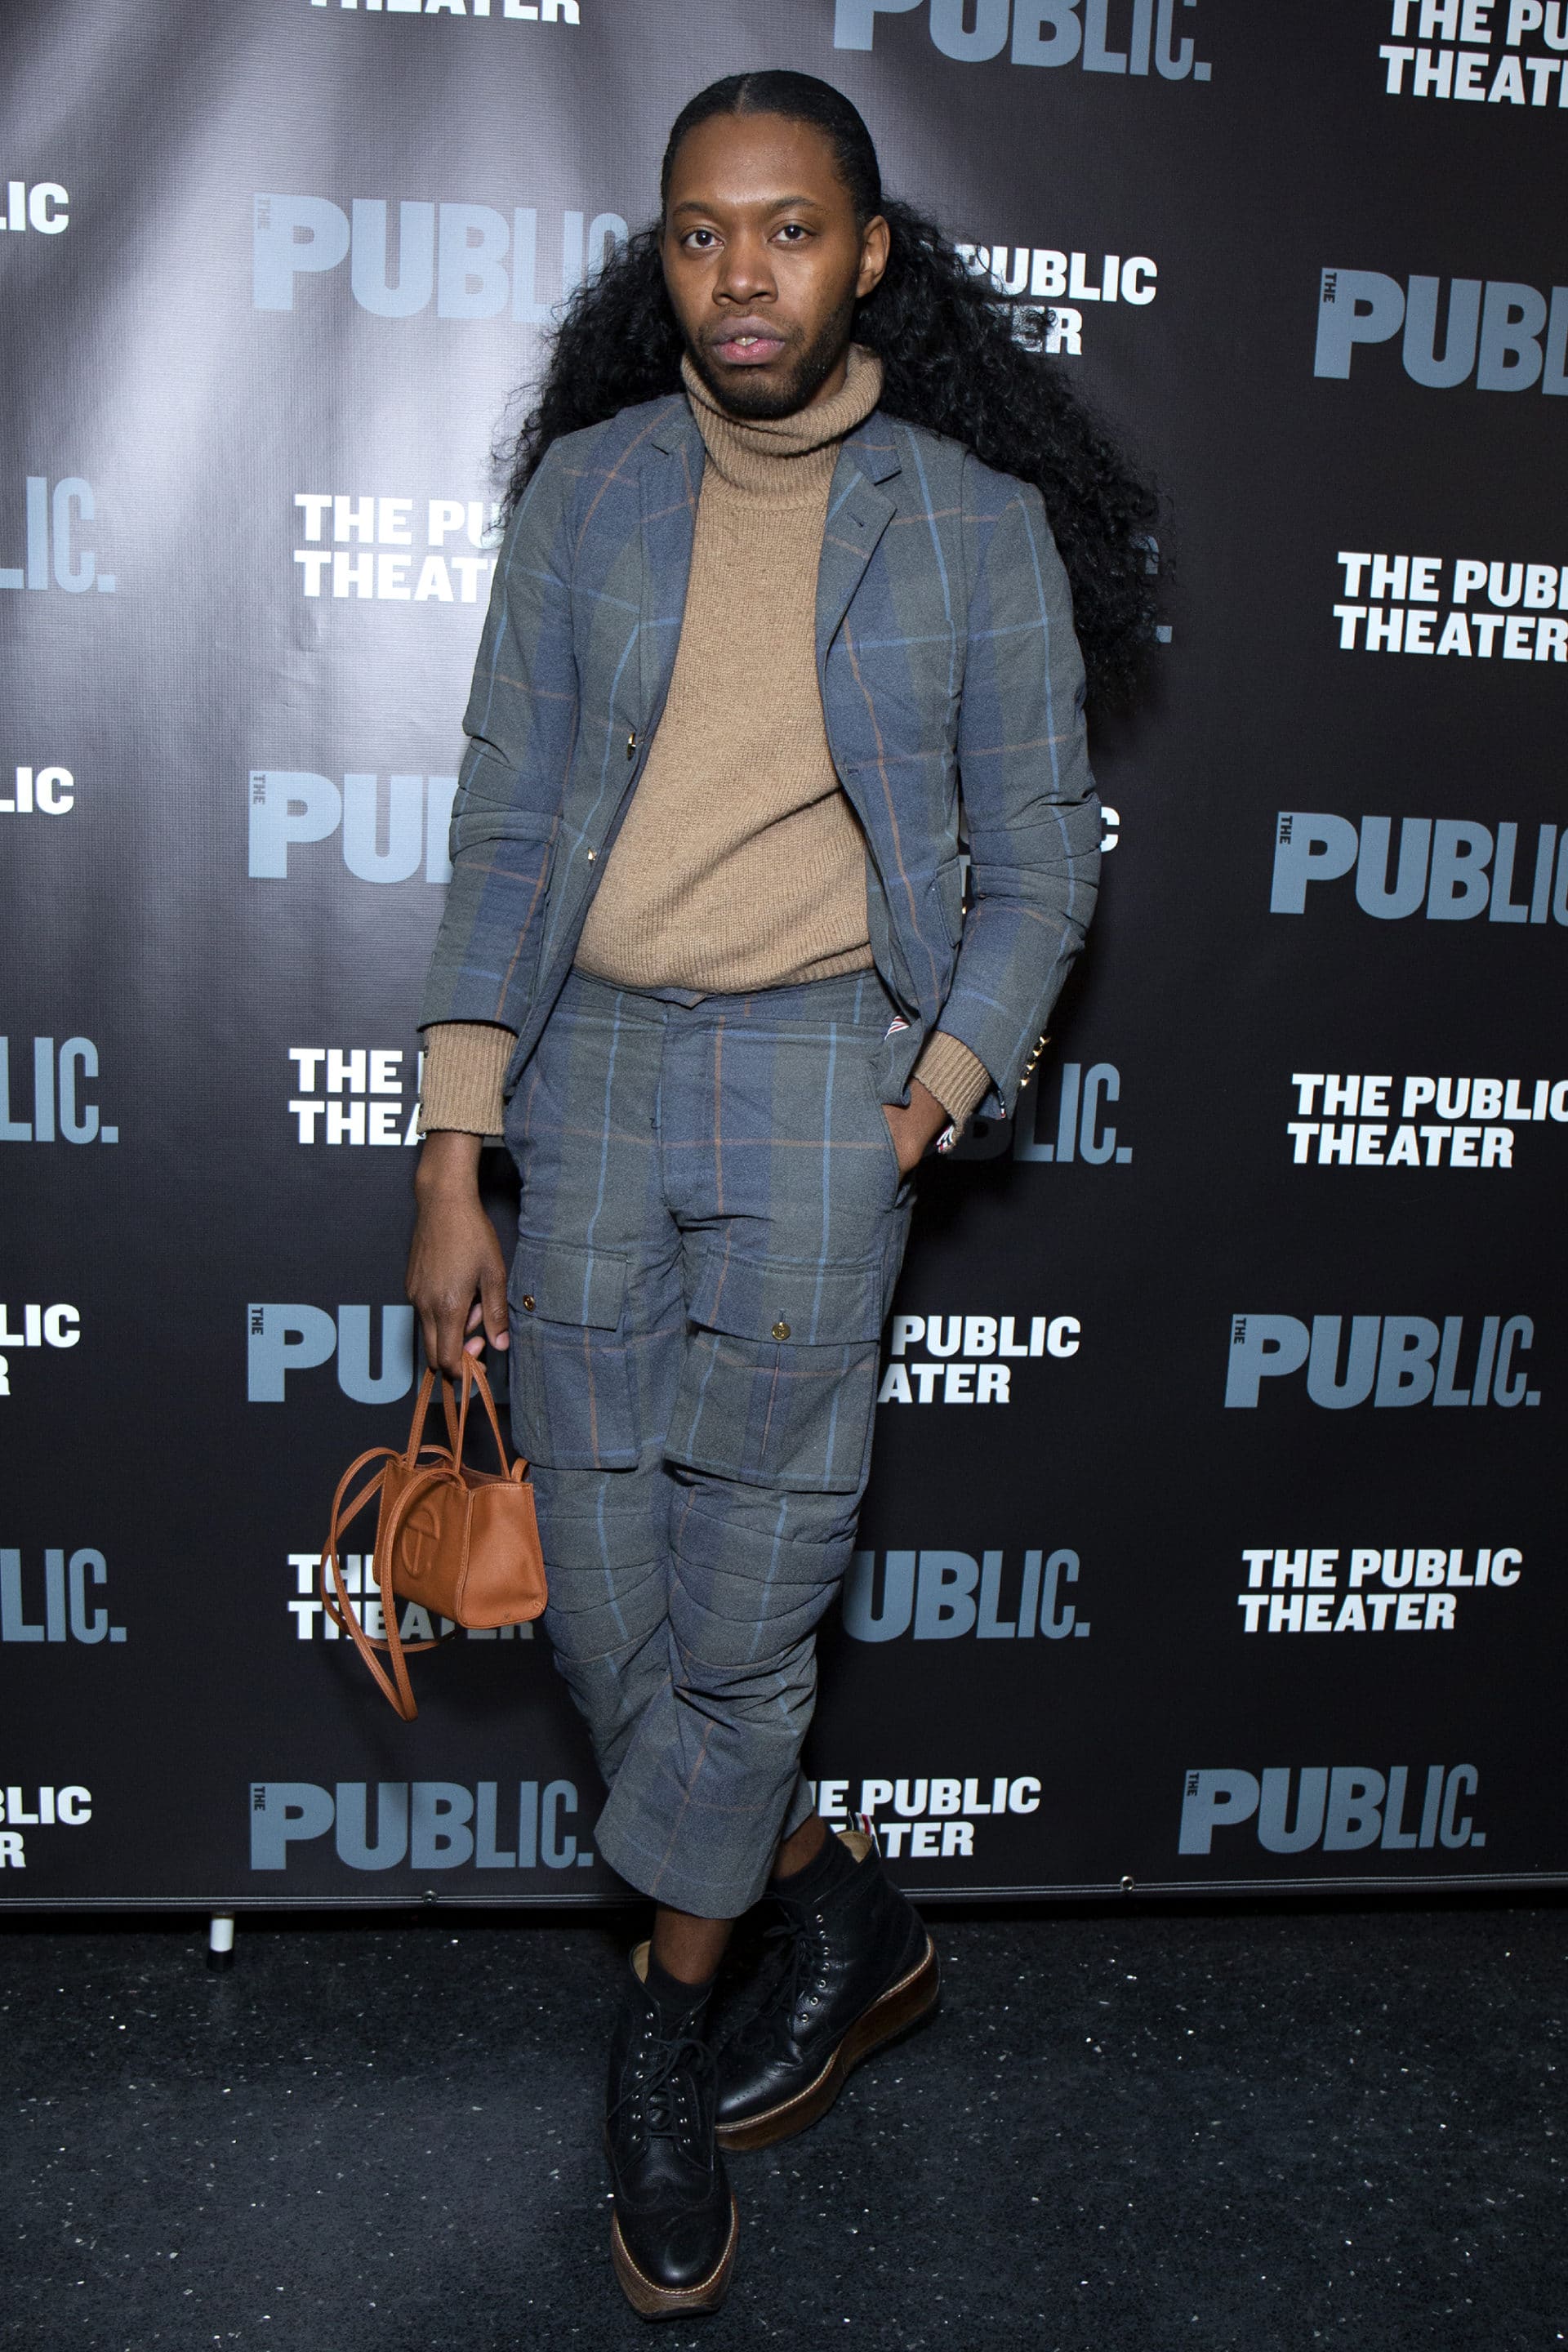 Issa Rae, Michael B. Jordan, Lena Waithe And More Celebs Out And About